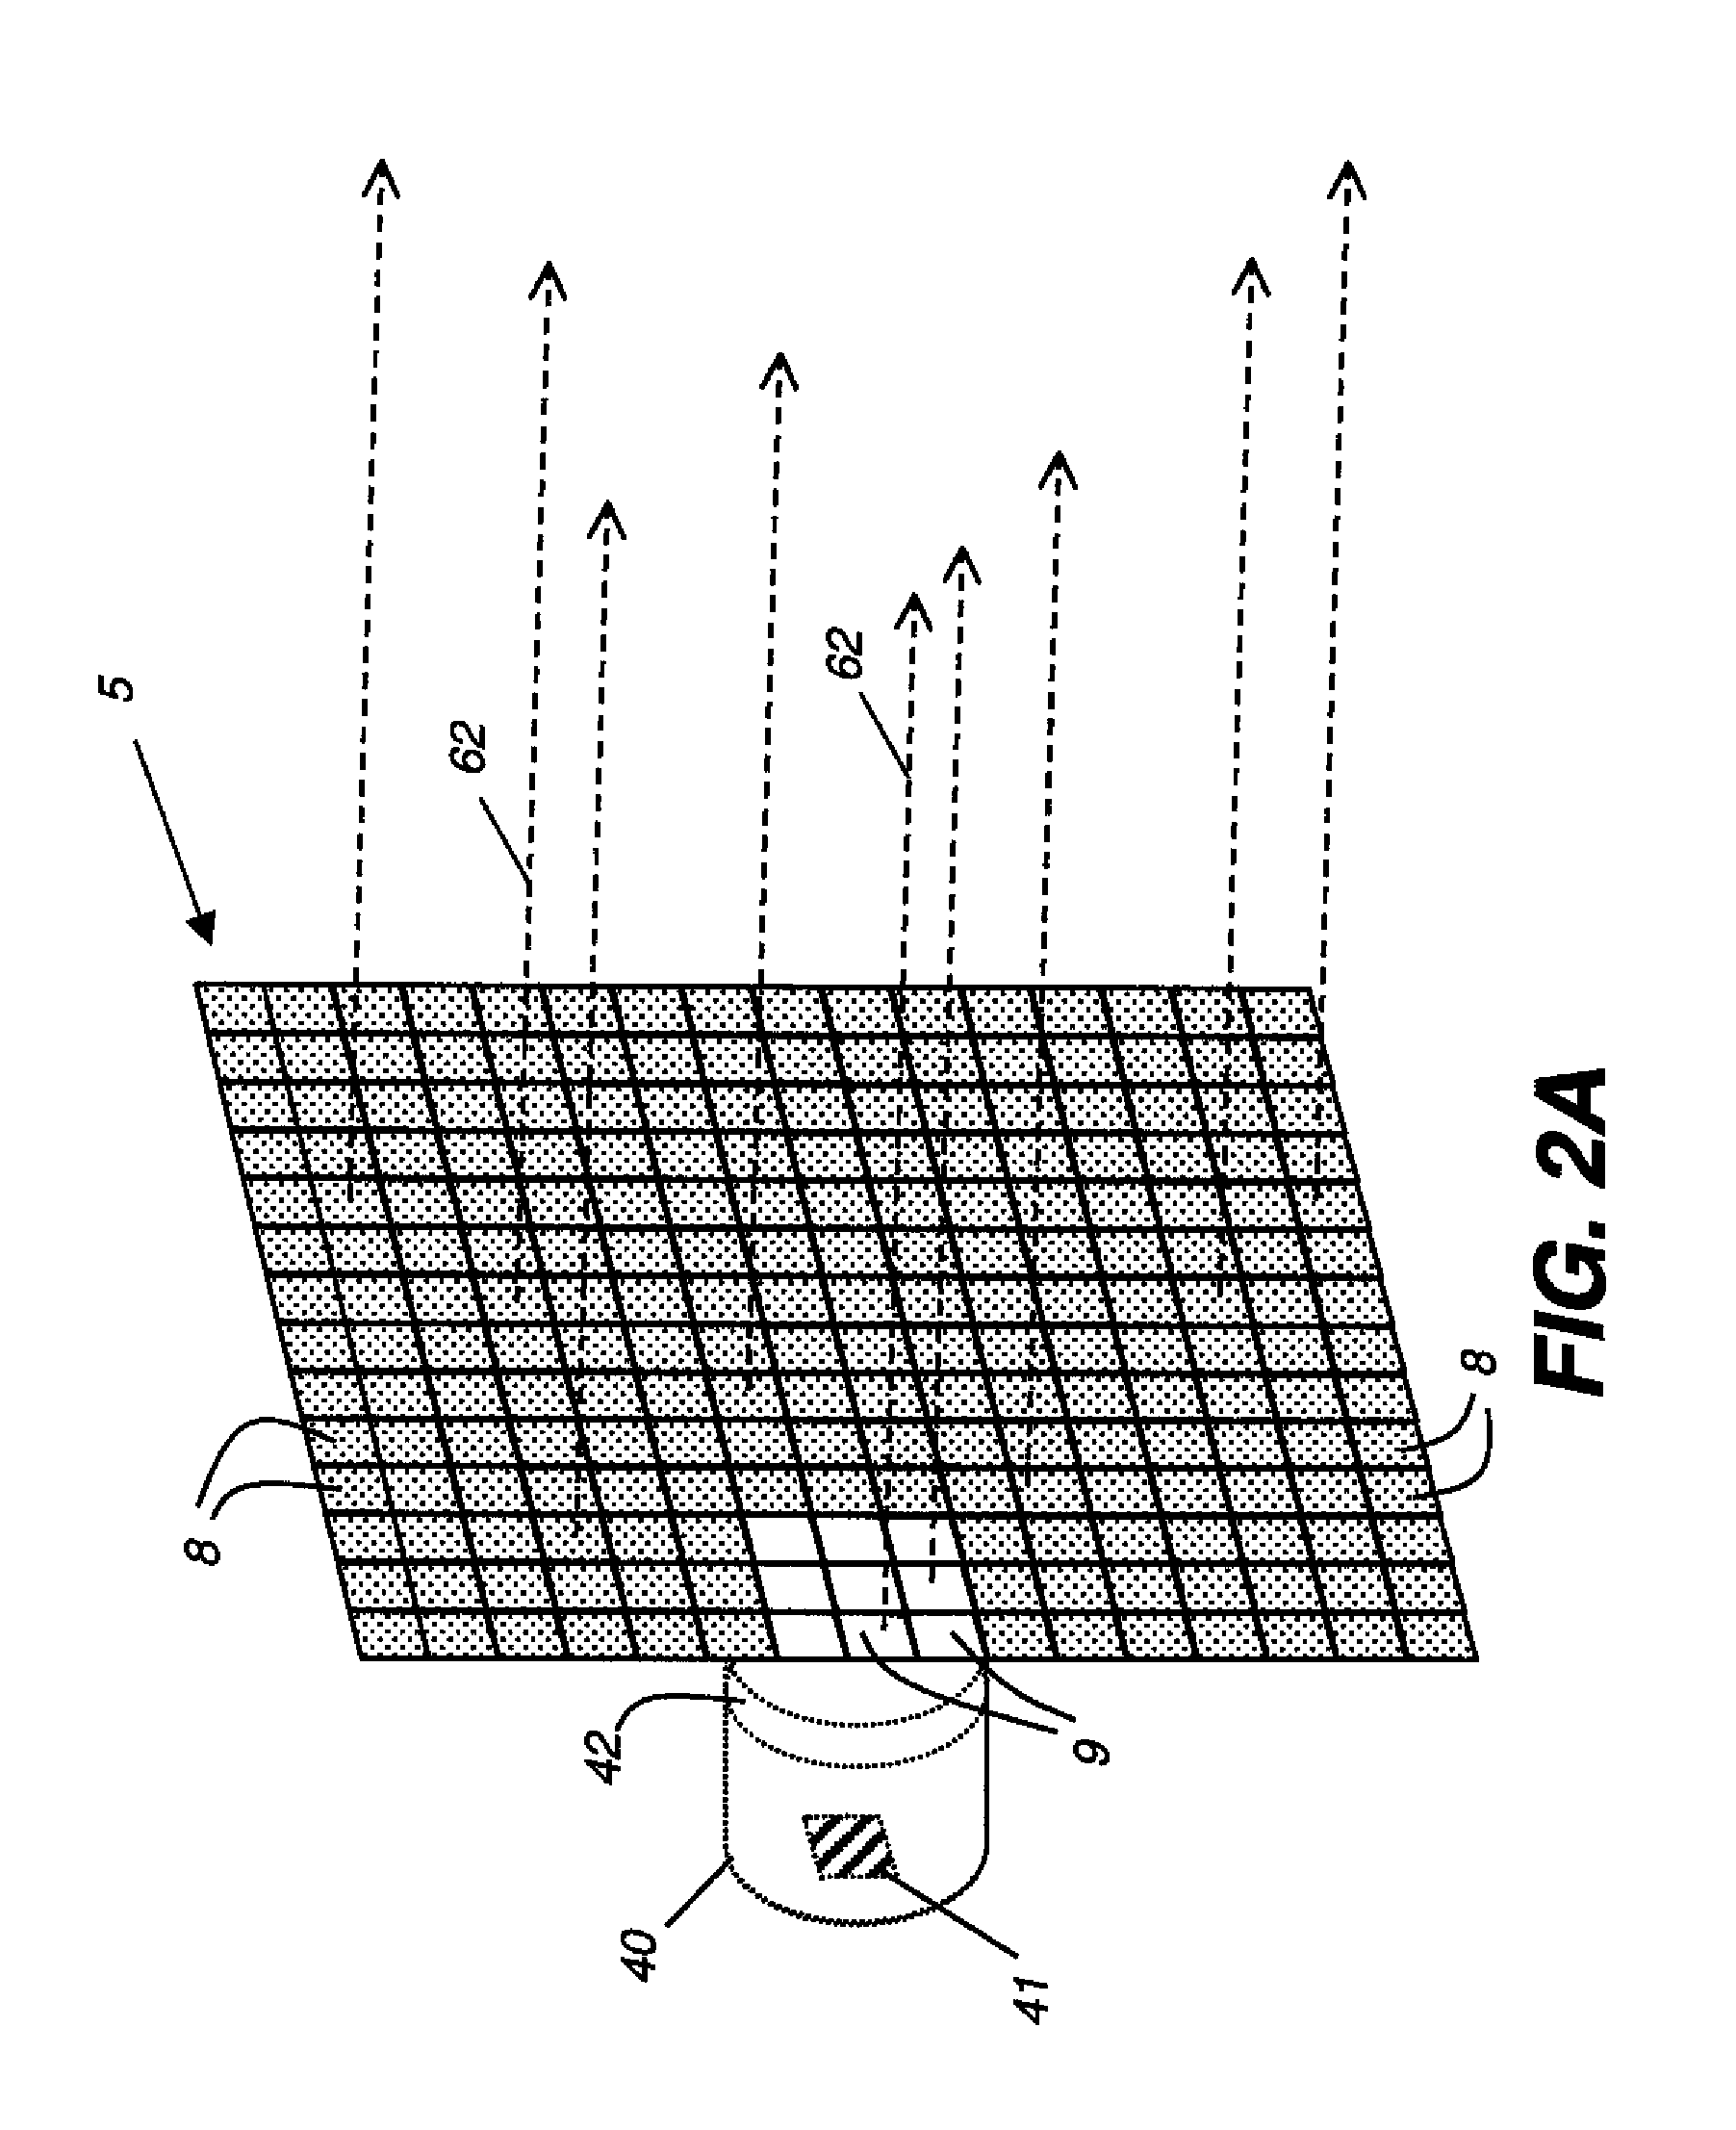 Image capture and integrated display apparatus